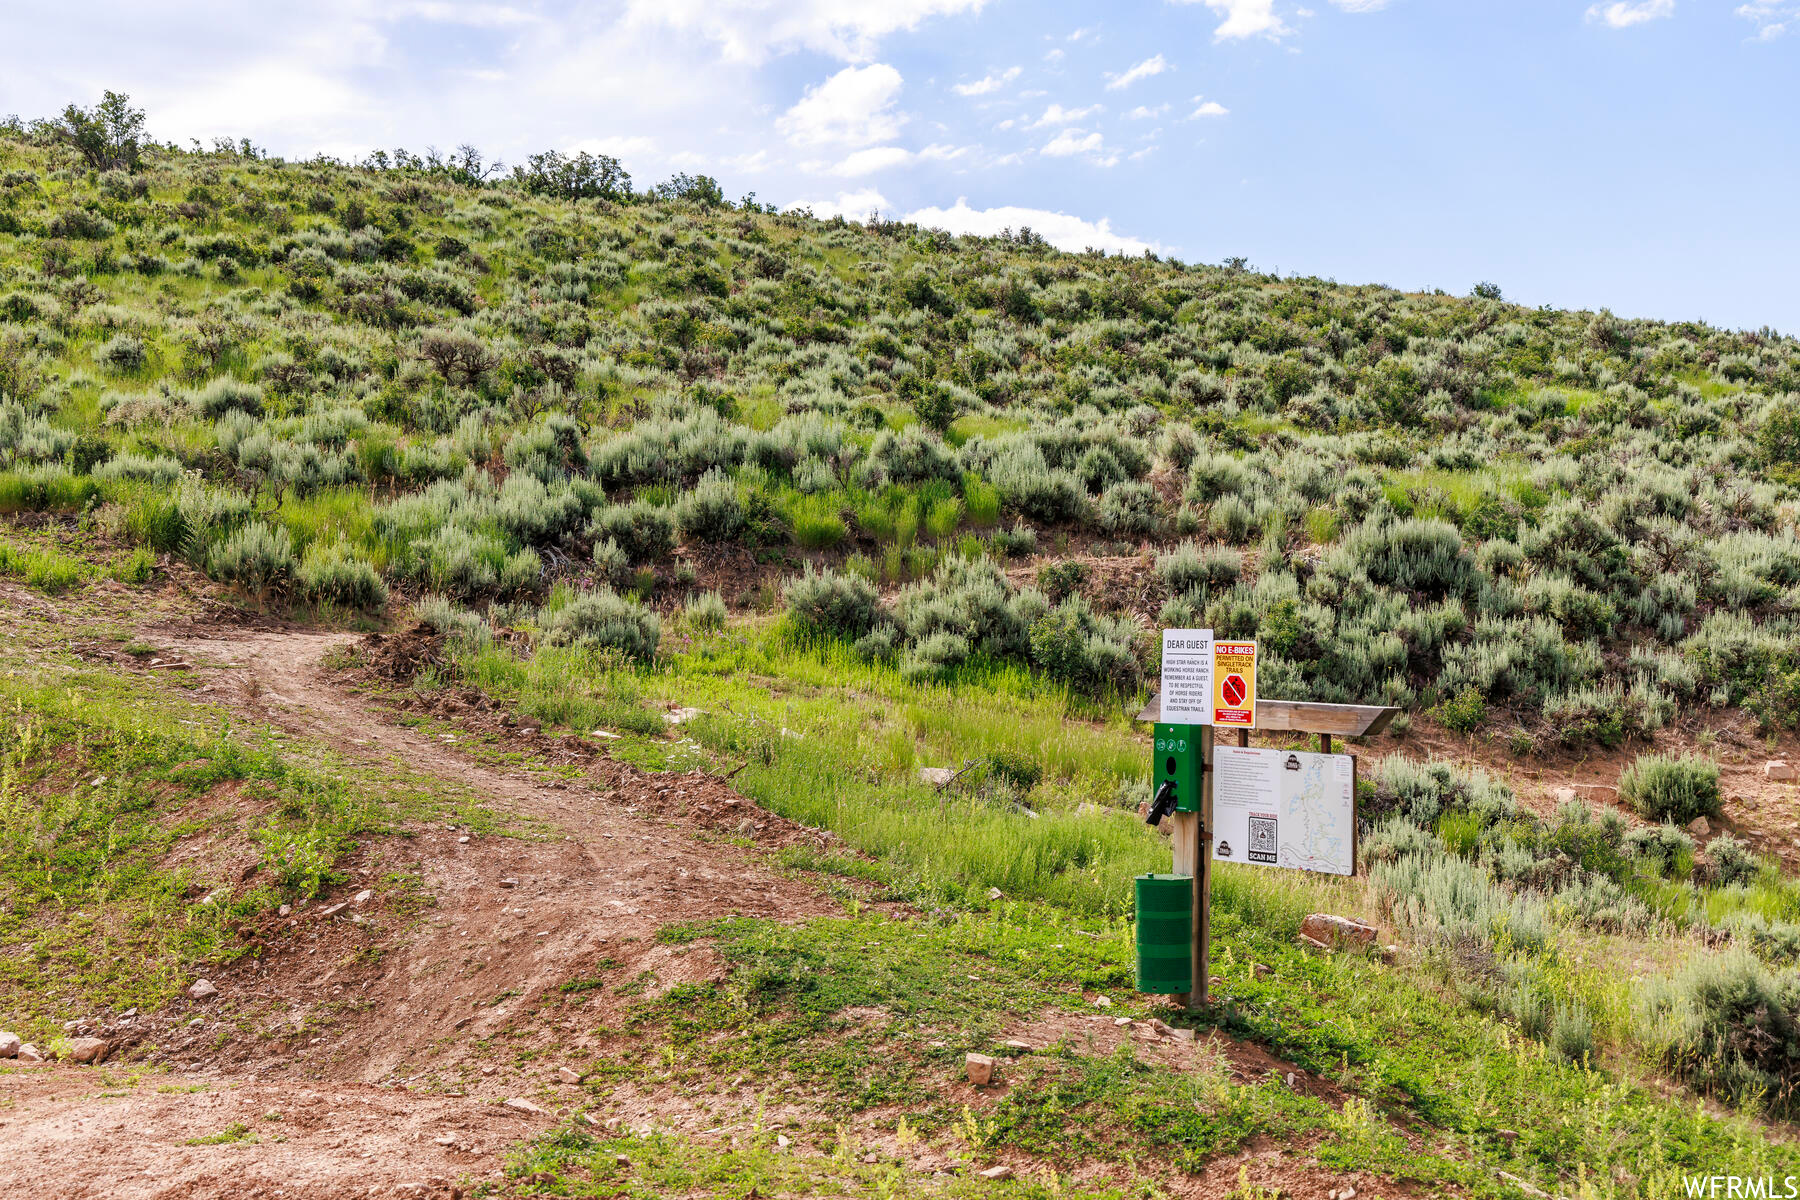 883 WASATCH VIEW #11, Kamas, Utah 84036, ,Land,For sale,WASATCH VIEW,1790479